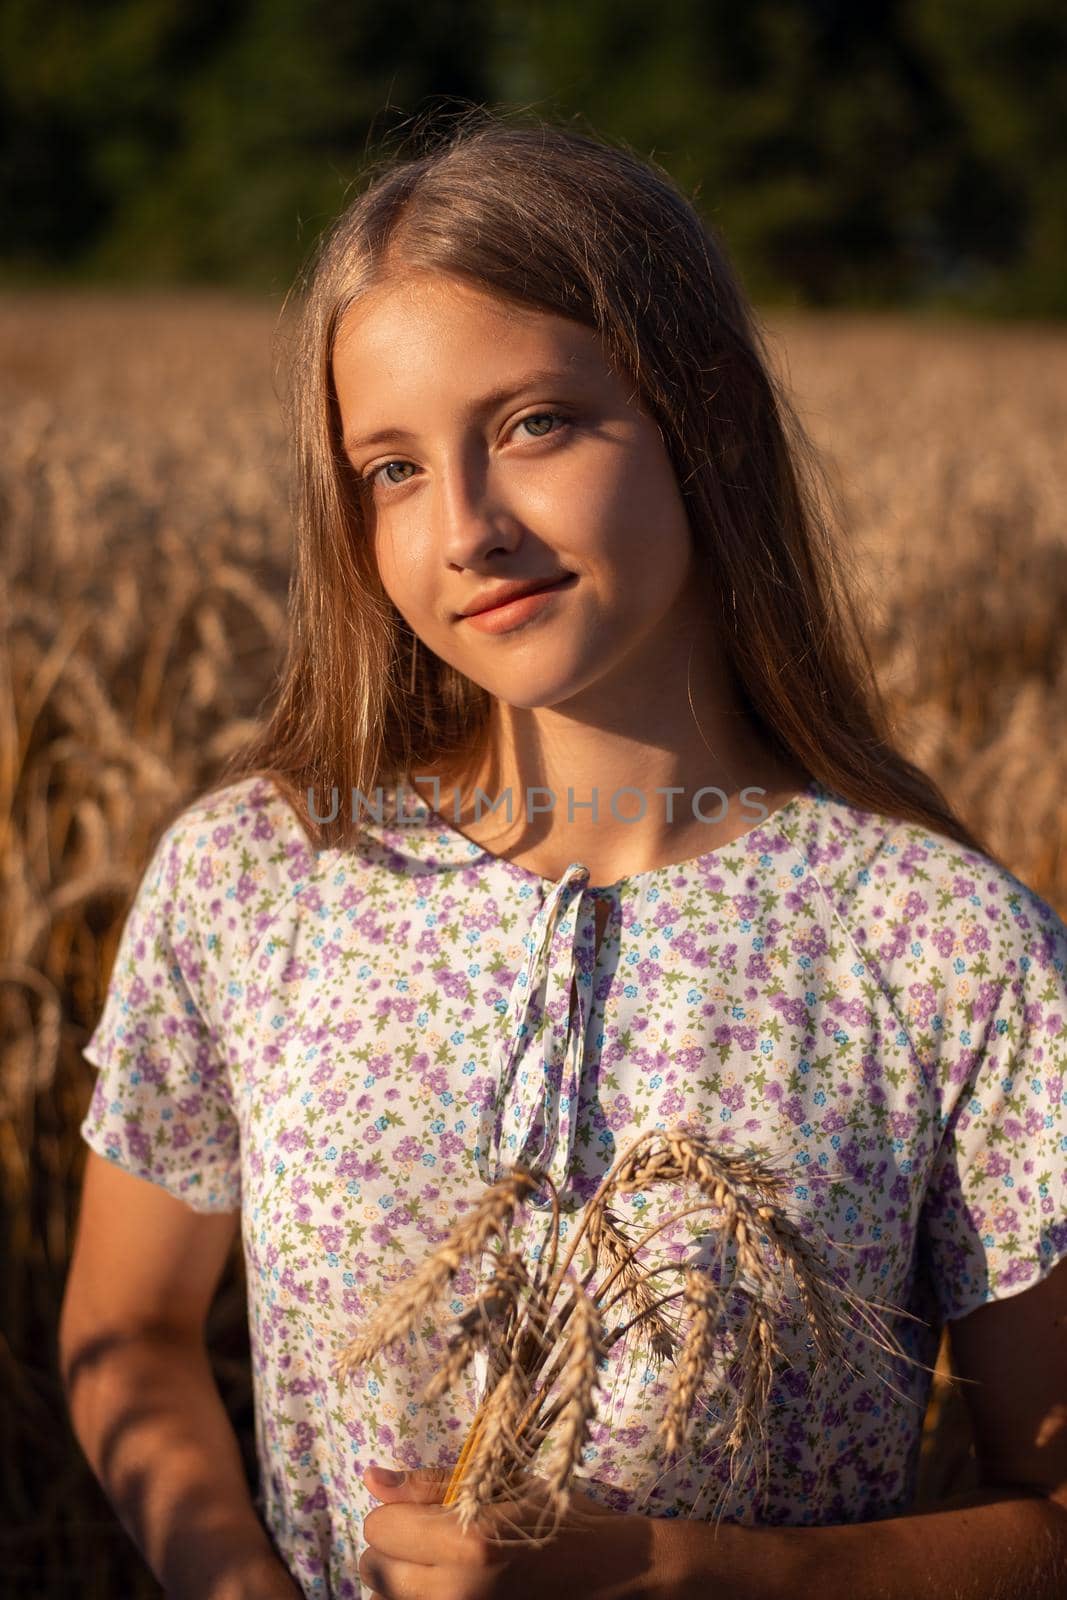 Portrait of beautiful smiling girl holding some rye ears sitting on the ground in the field of ripe wheat